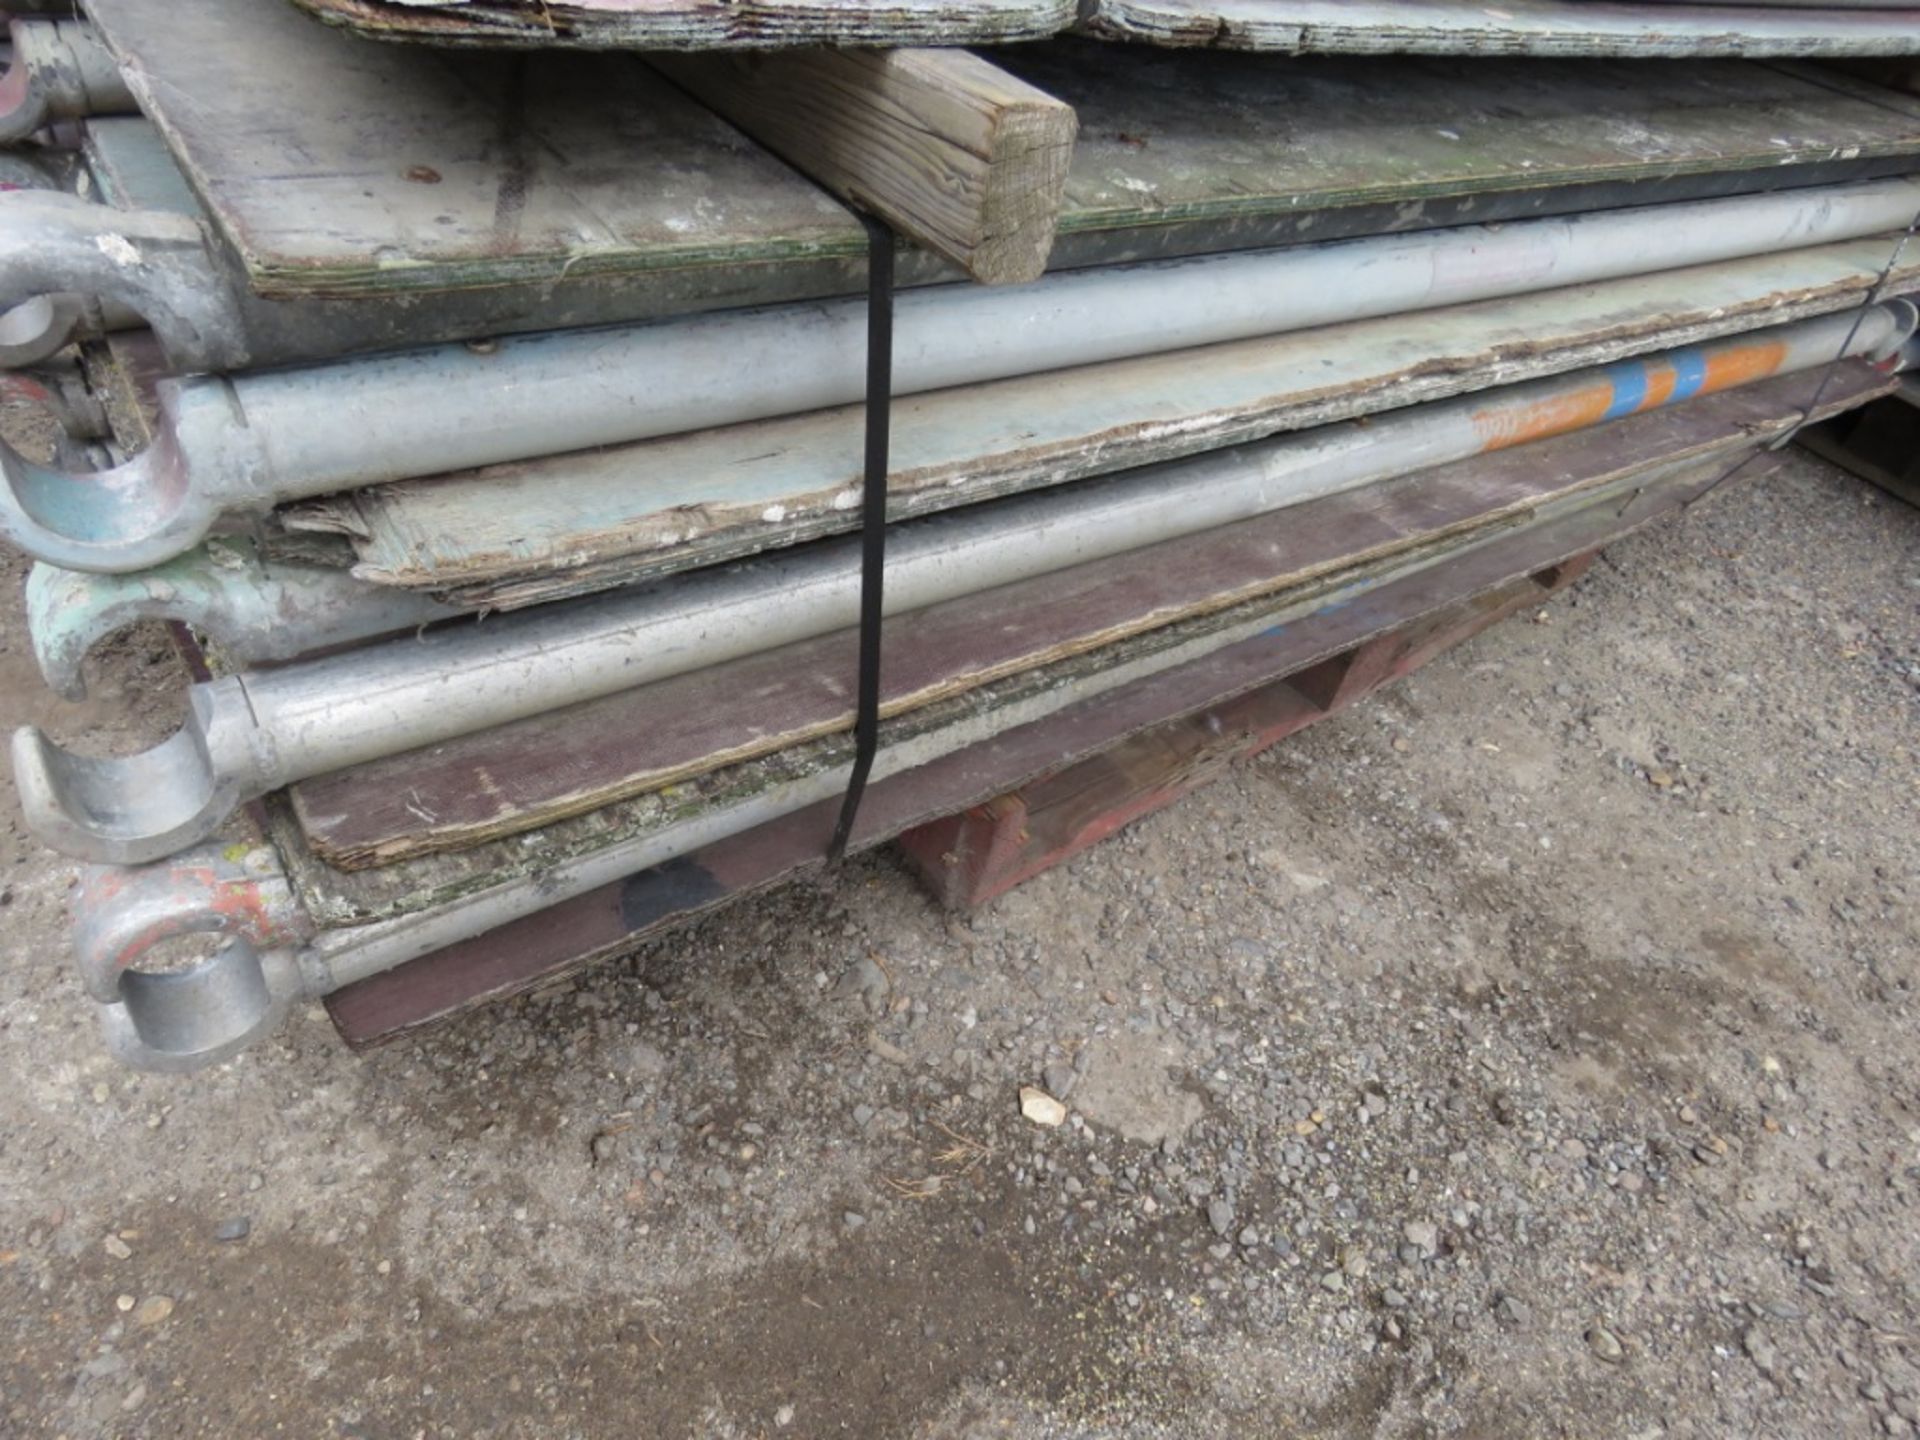 BUNDLE OF 12 X TOWER SCAFFOLD PLATFORMS 69" OVERALL LENGTH.